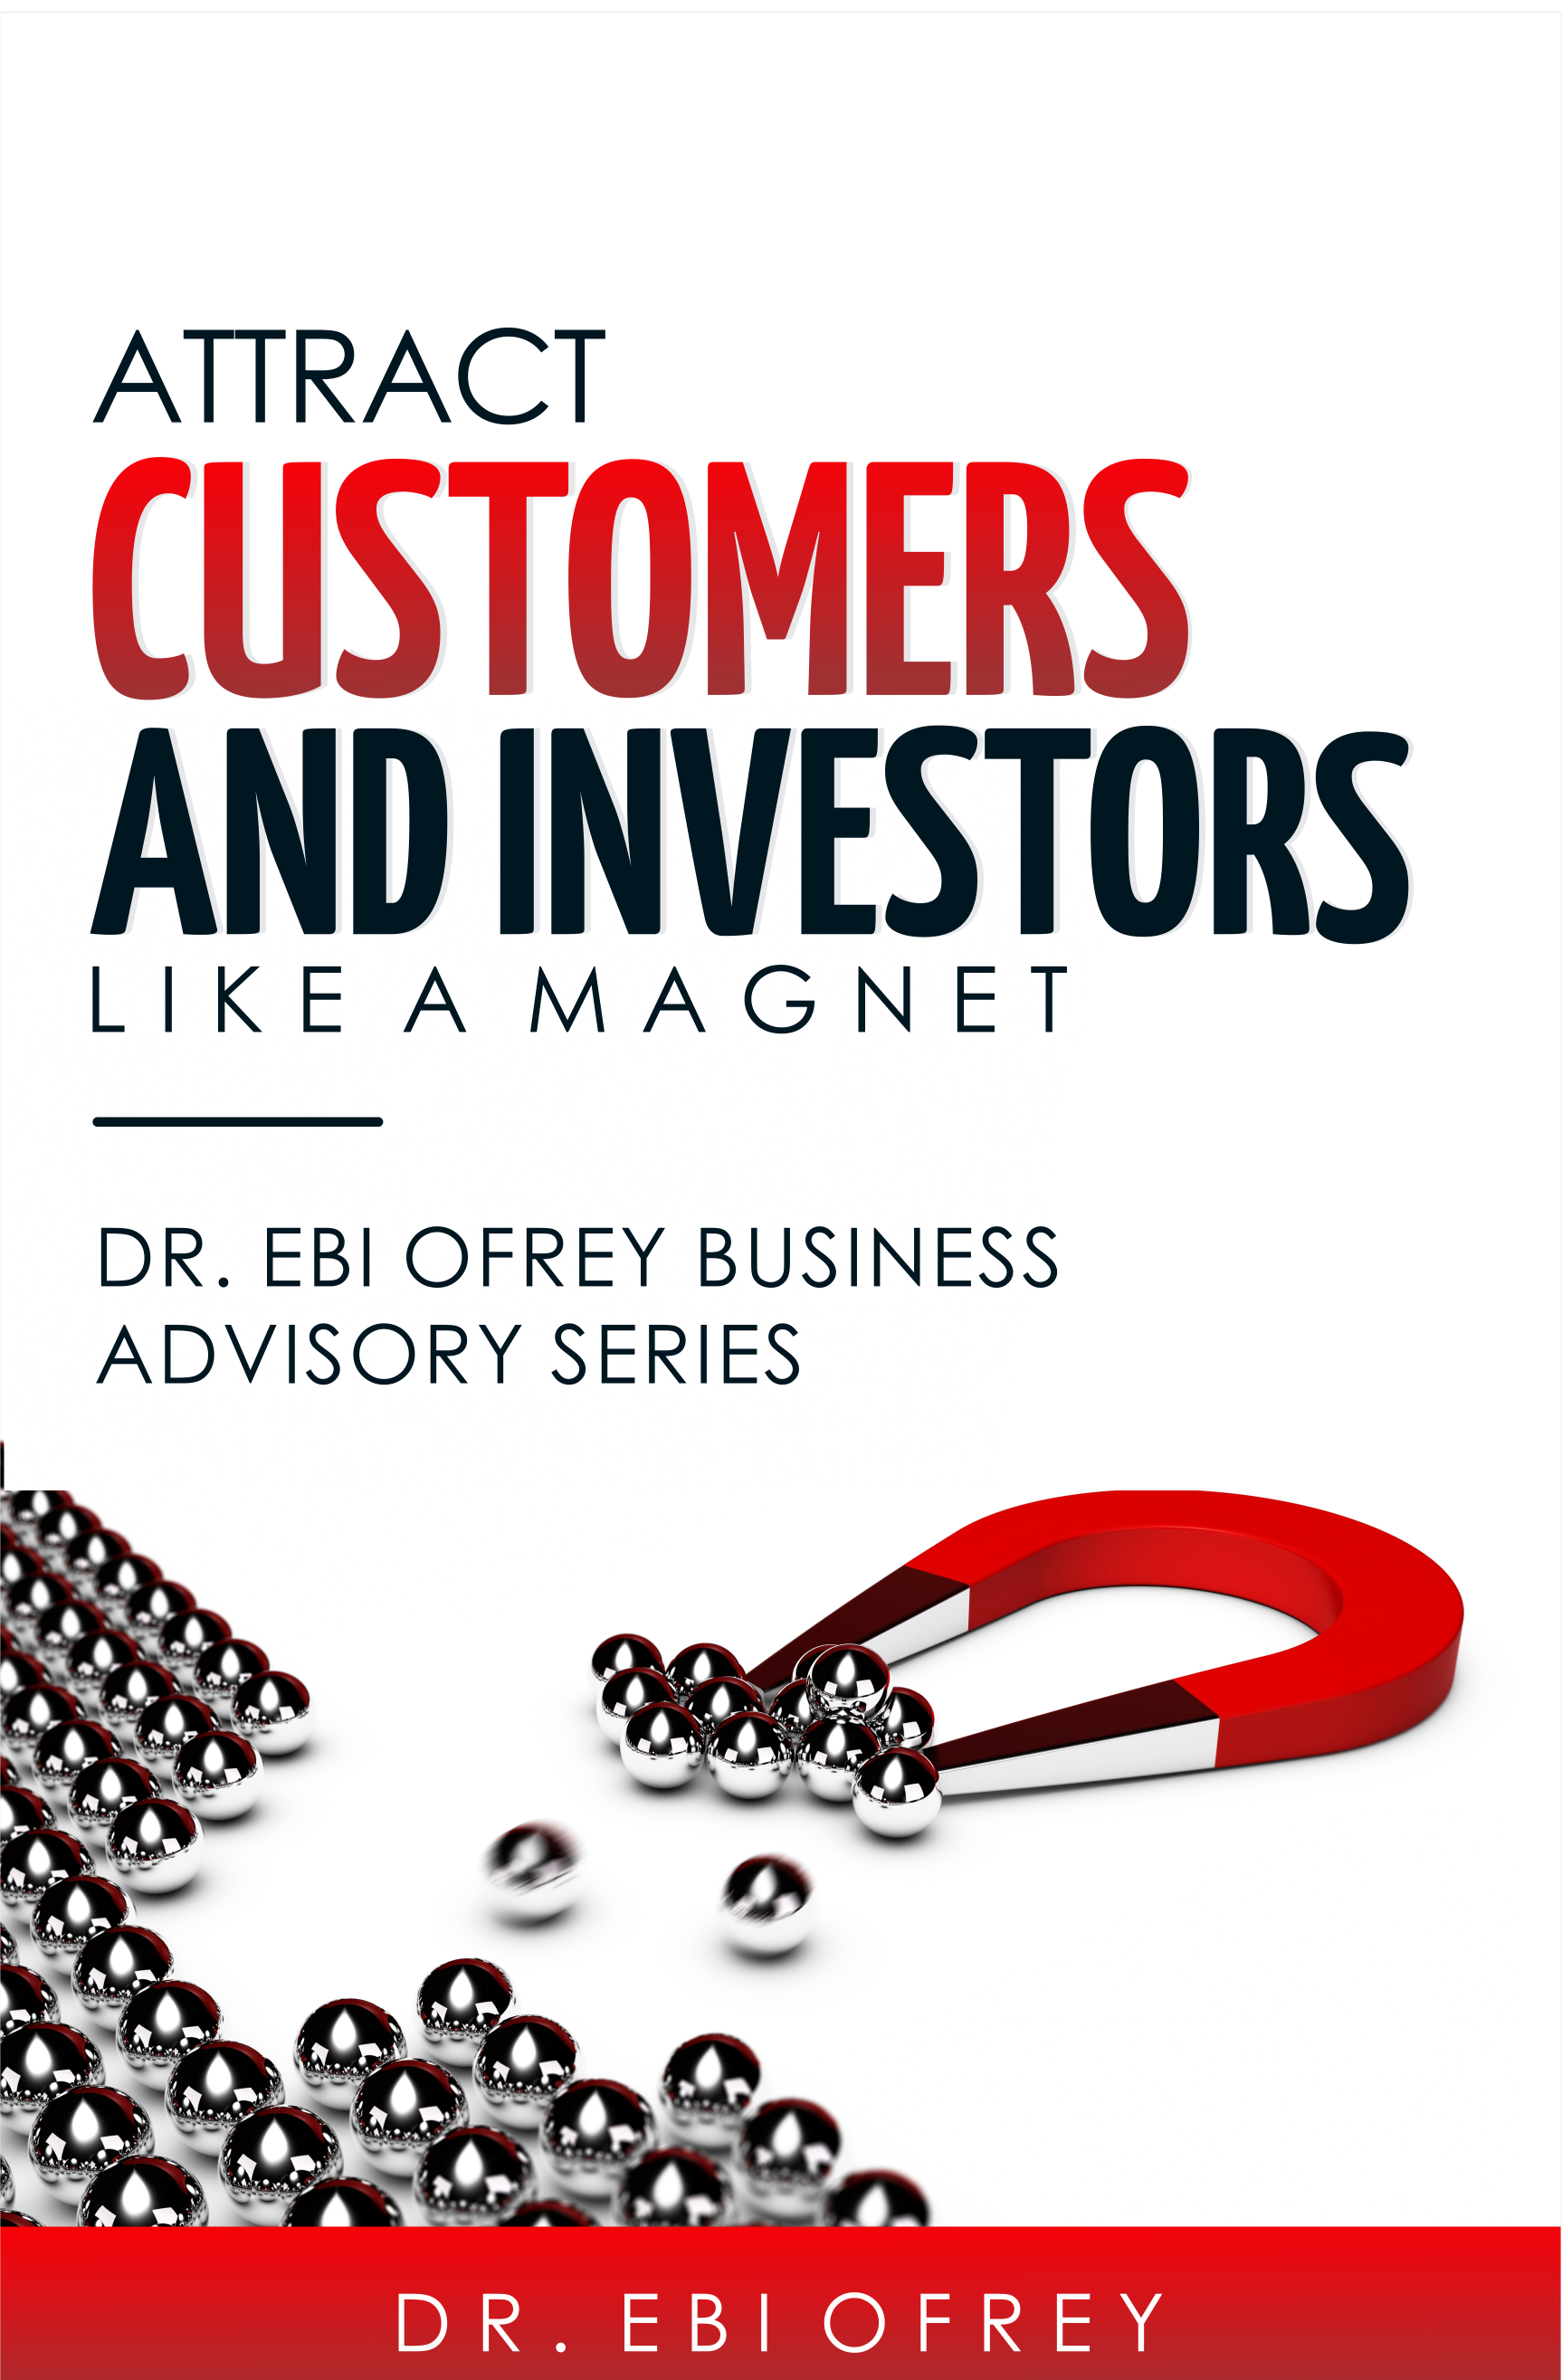 Attract-Customers-and-Investors-Like-a-Magnet